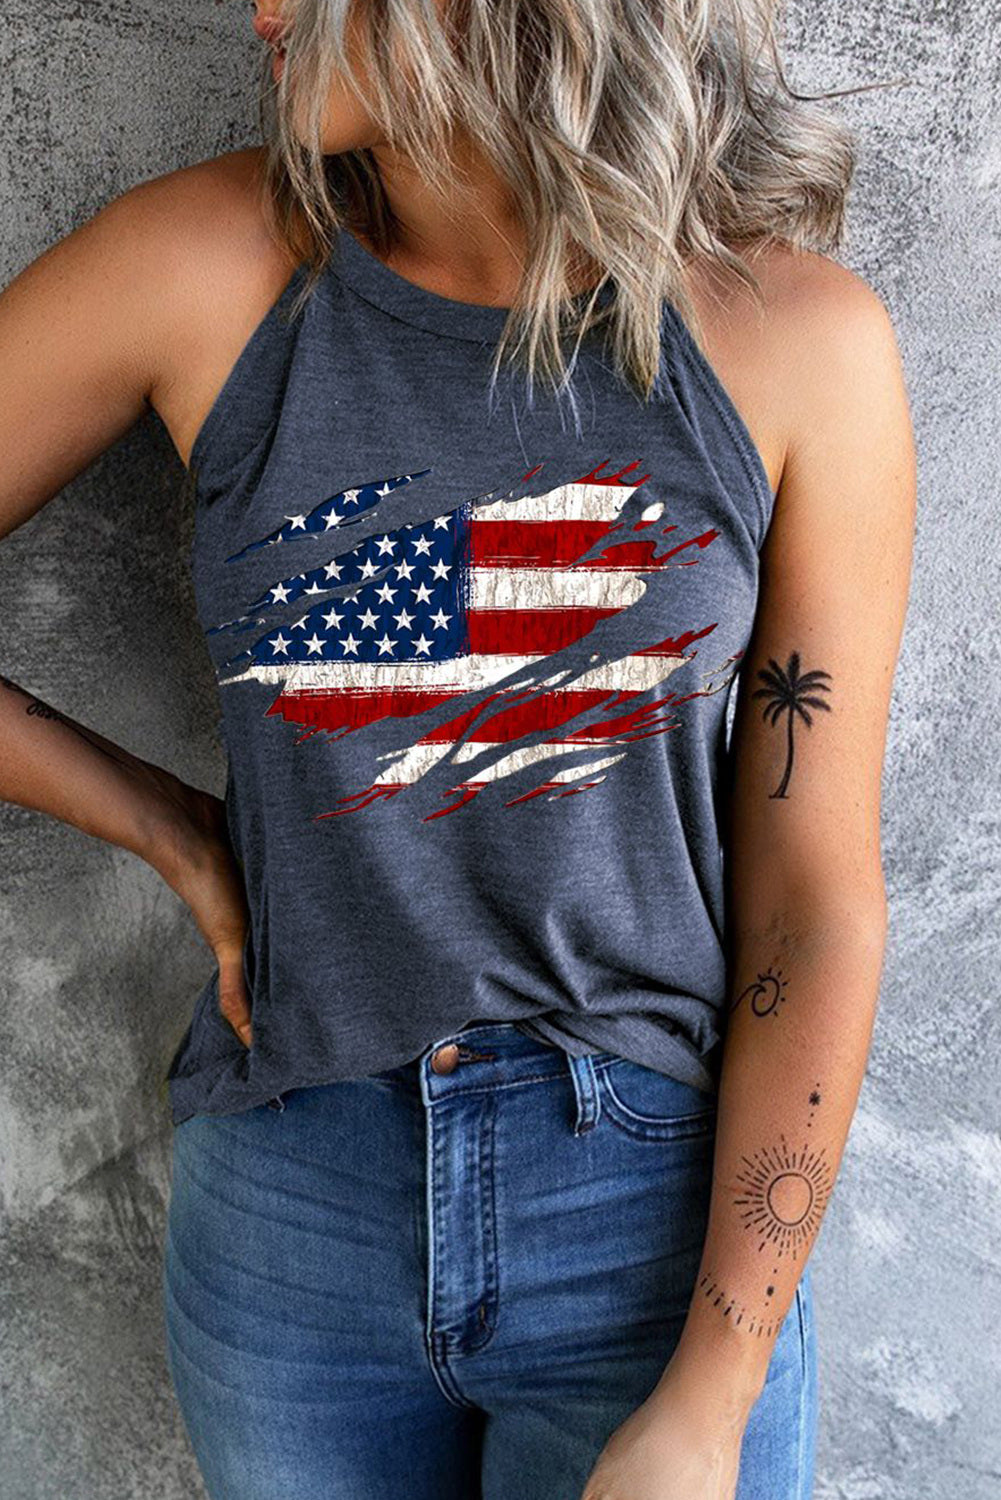 American Flag Round Neck Casual Tank Tops $ 19.99 - Evaless